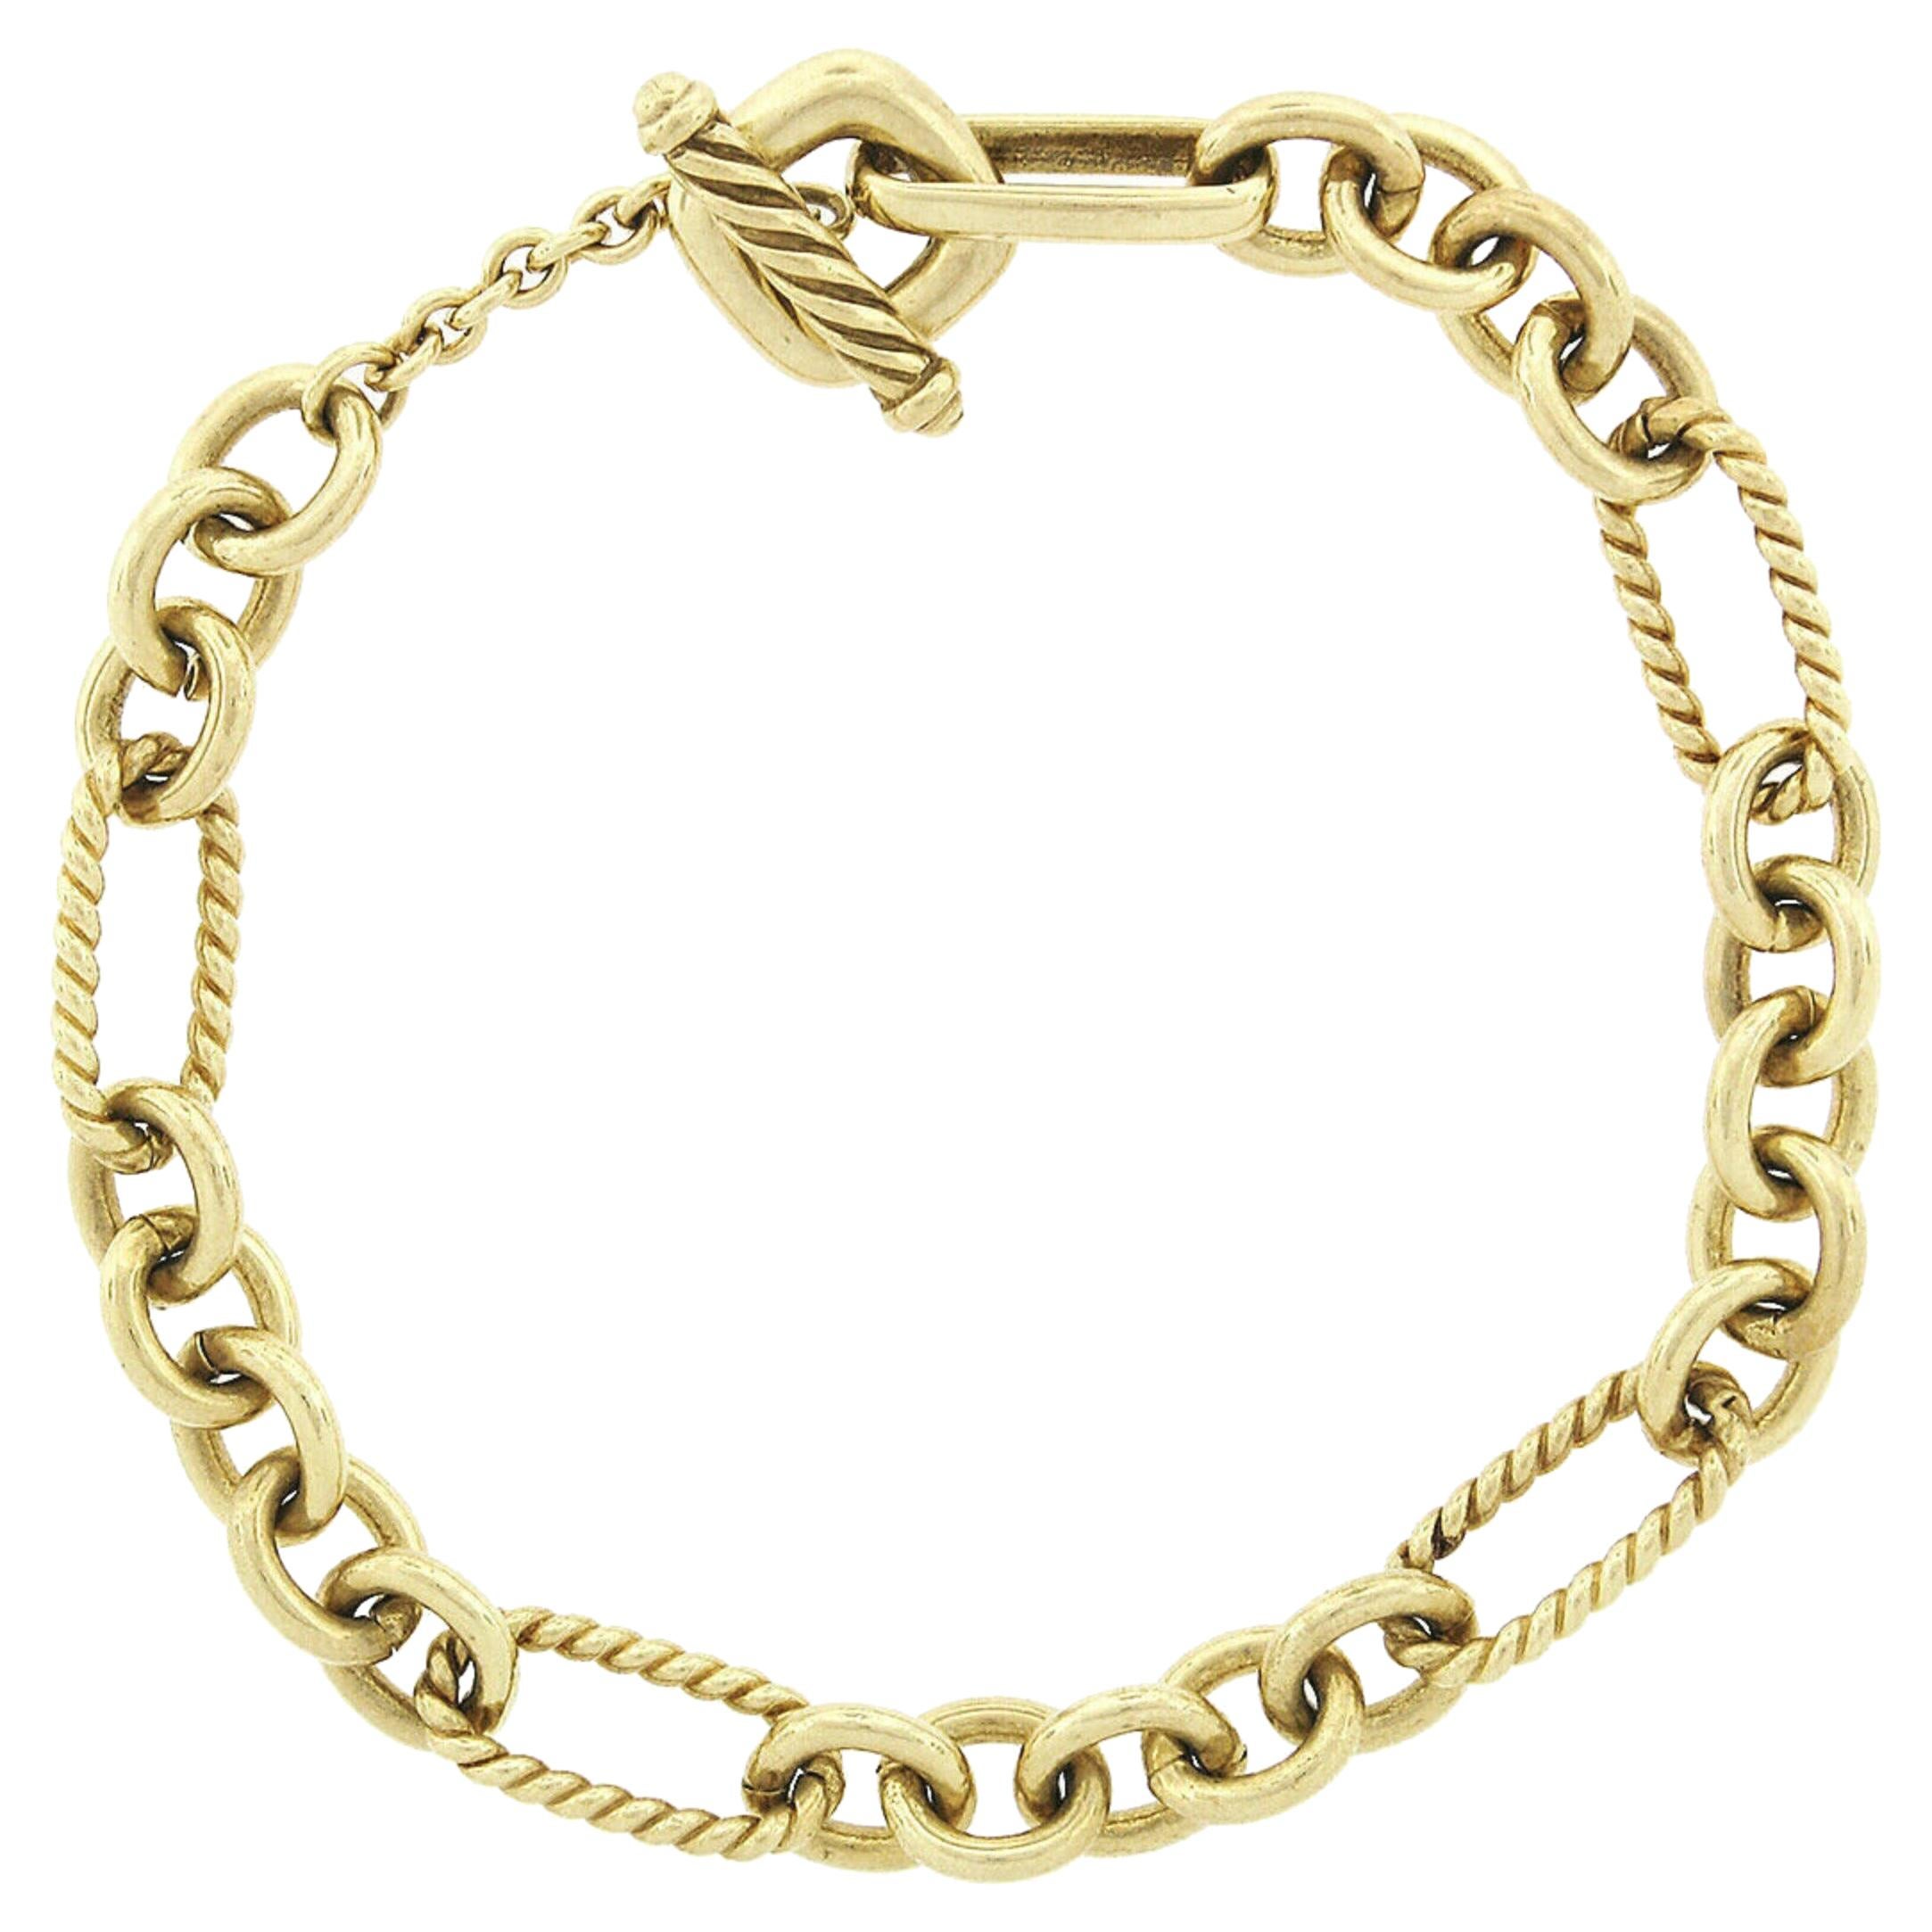 David Yurman 18k Gold Twisted Wire & Polished Cable Chain Toggle Bracelet